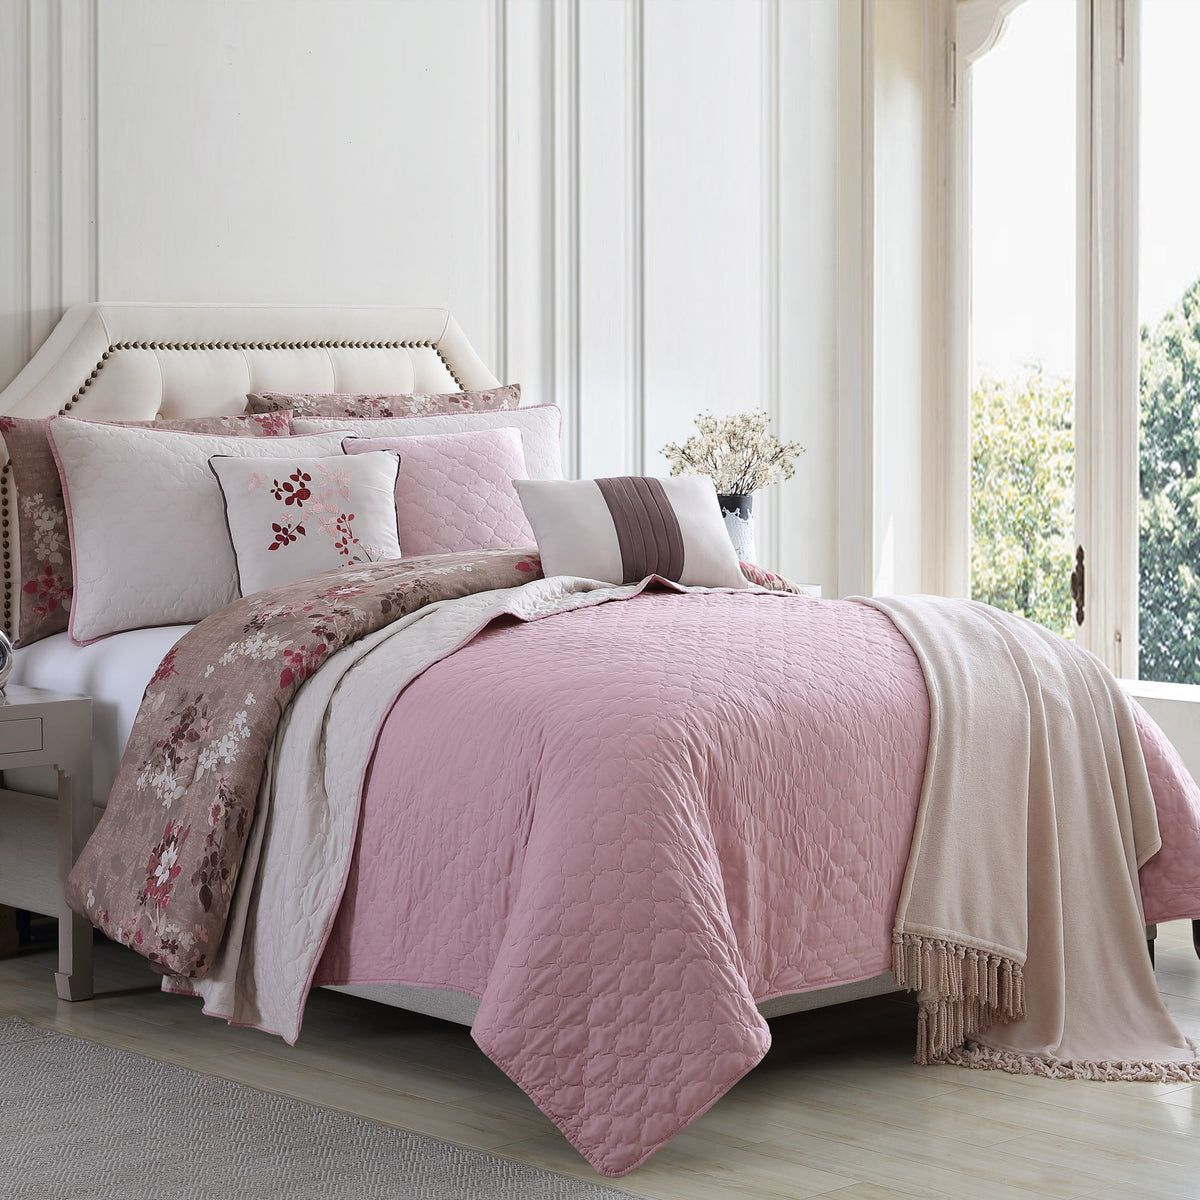 Andria 10 Piece King Size Comforter and Coverlet Set , Brown and Pink - BM202801